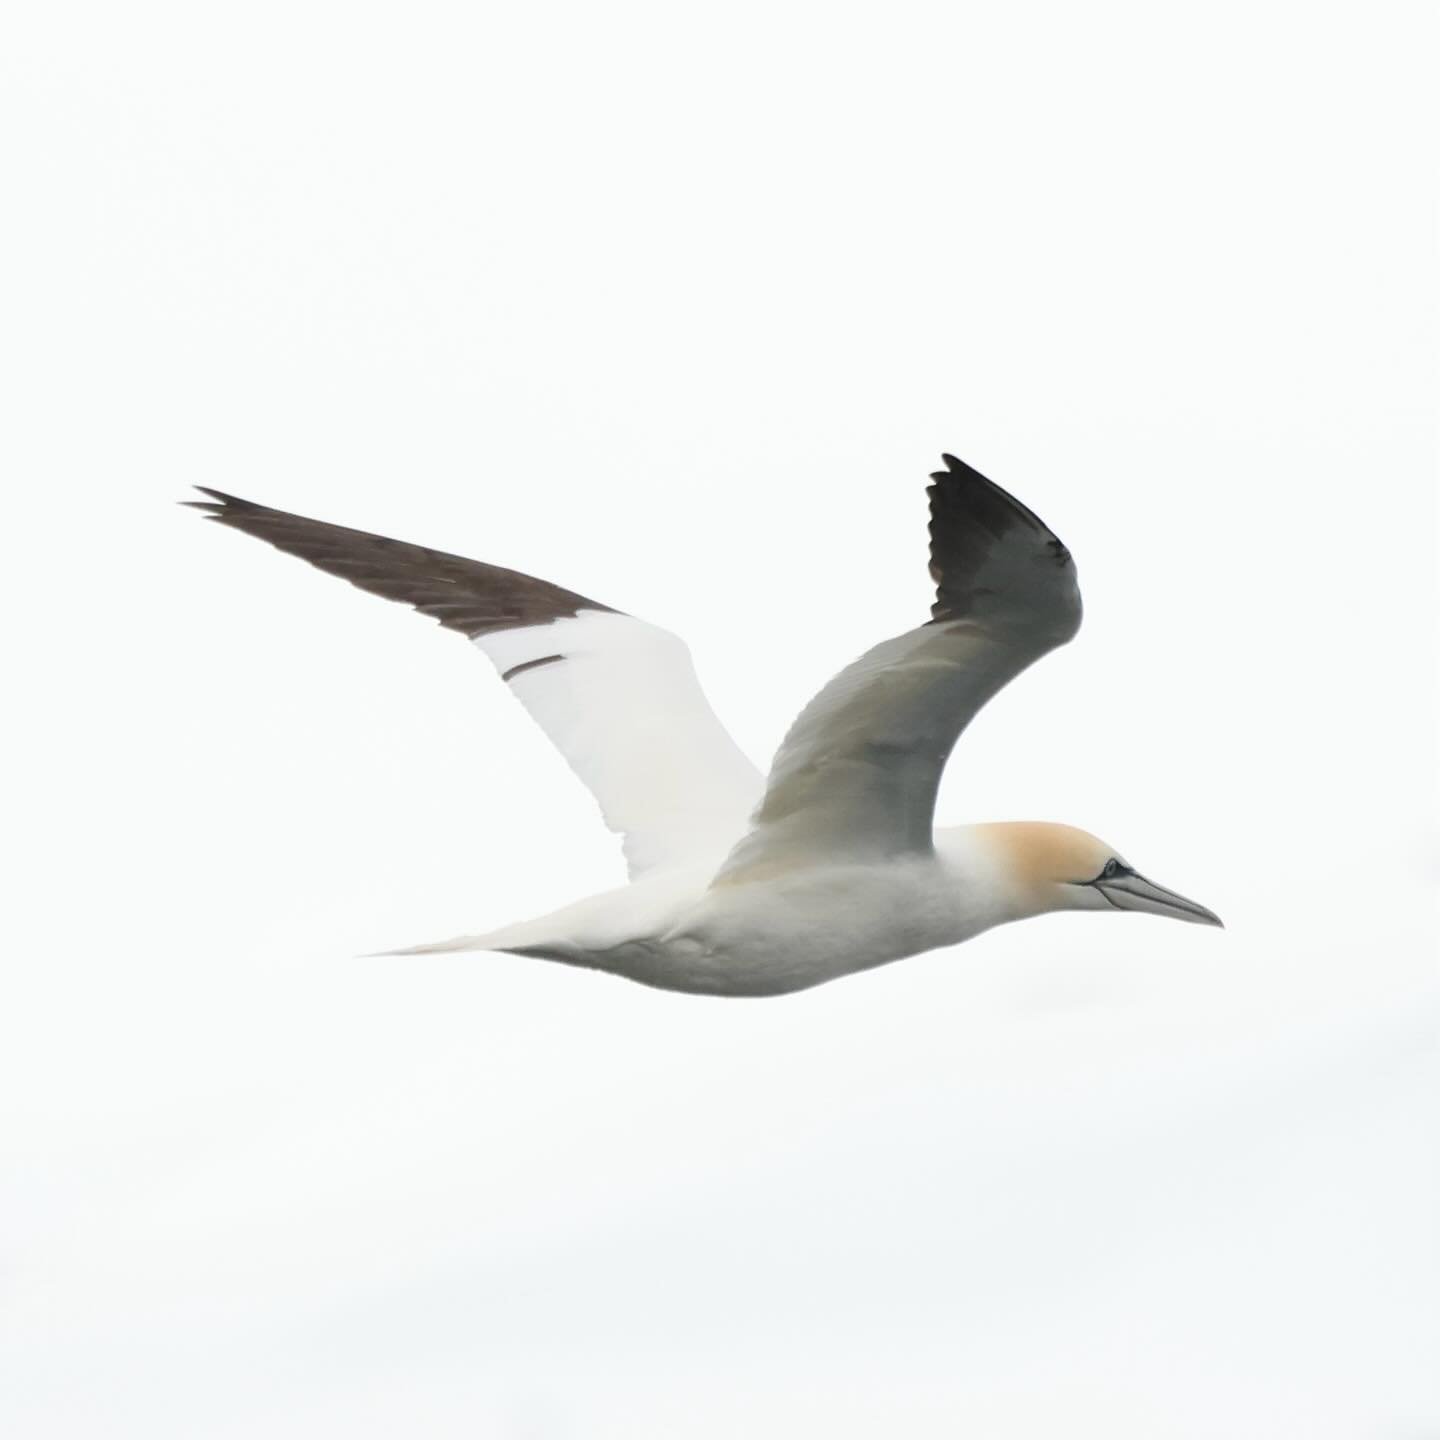 Gannets are back! 
Northern Gannets are the largest diving birds in Iceland, their wing span can reach 180cm and they can reach the speed of 100km/h when diving to seek for food. Nature equipped them with what could be compared to an airbag around th